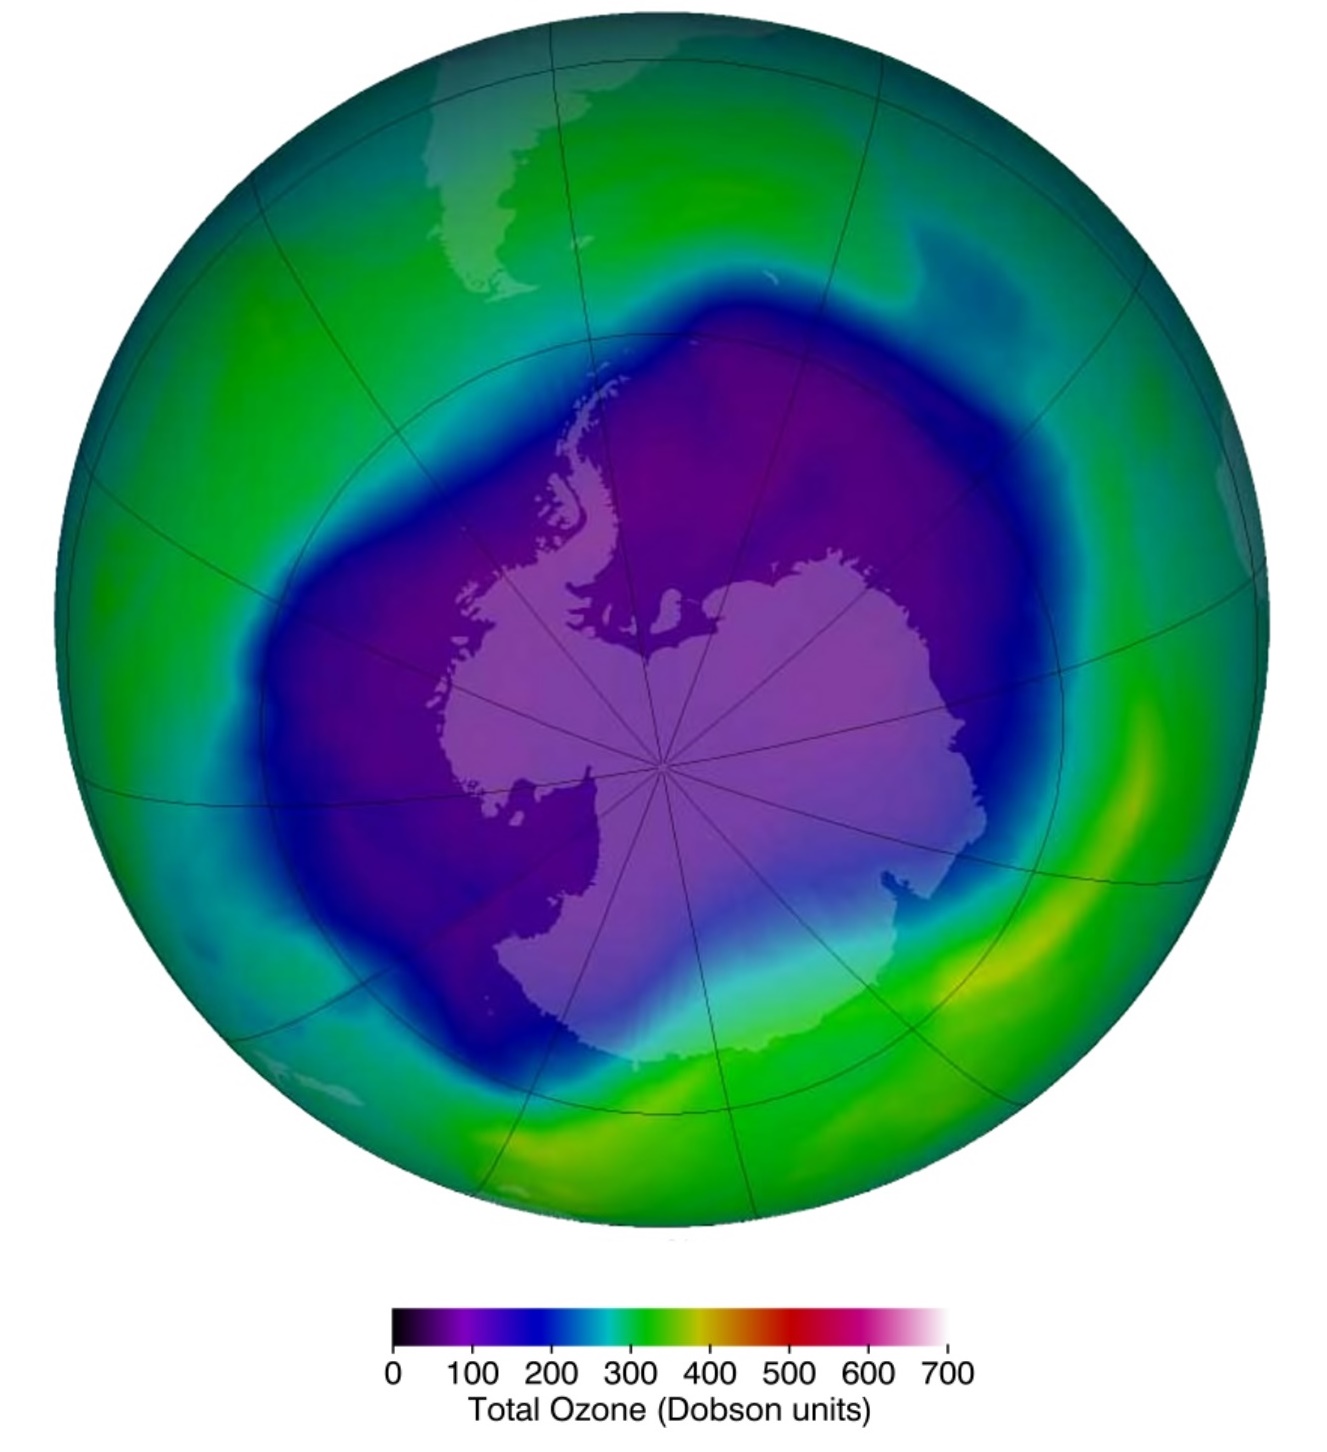 Ozone hole above the Antarctic 24 Sep 2006